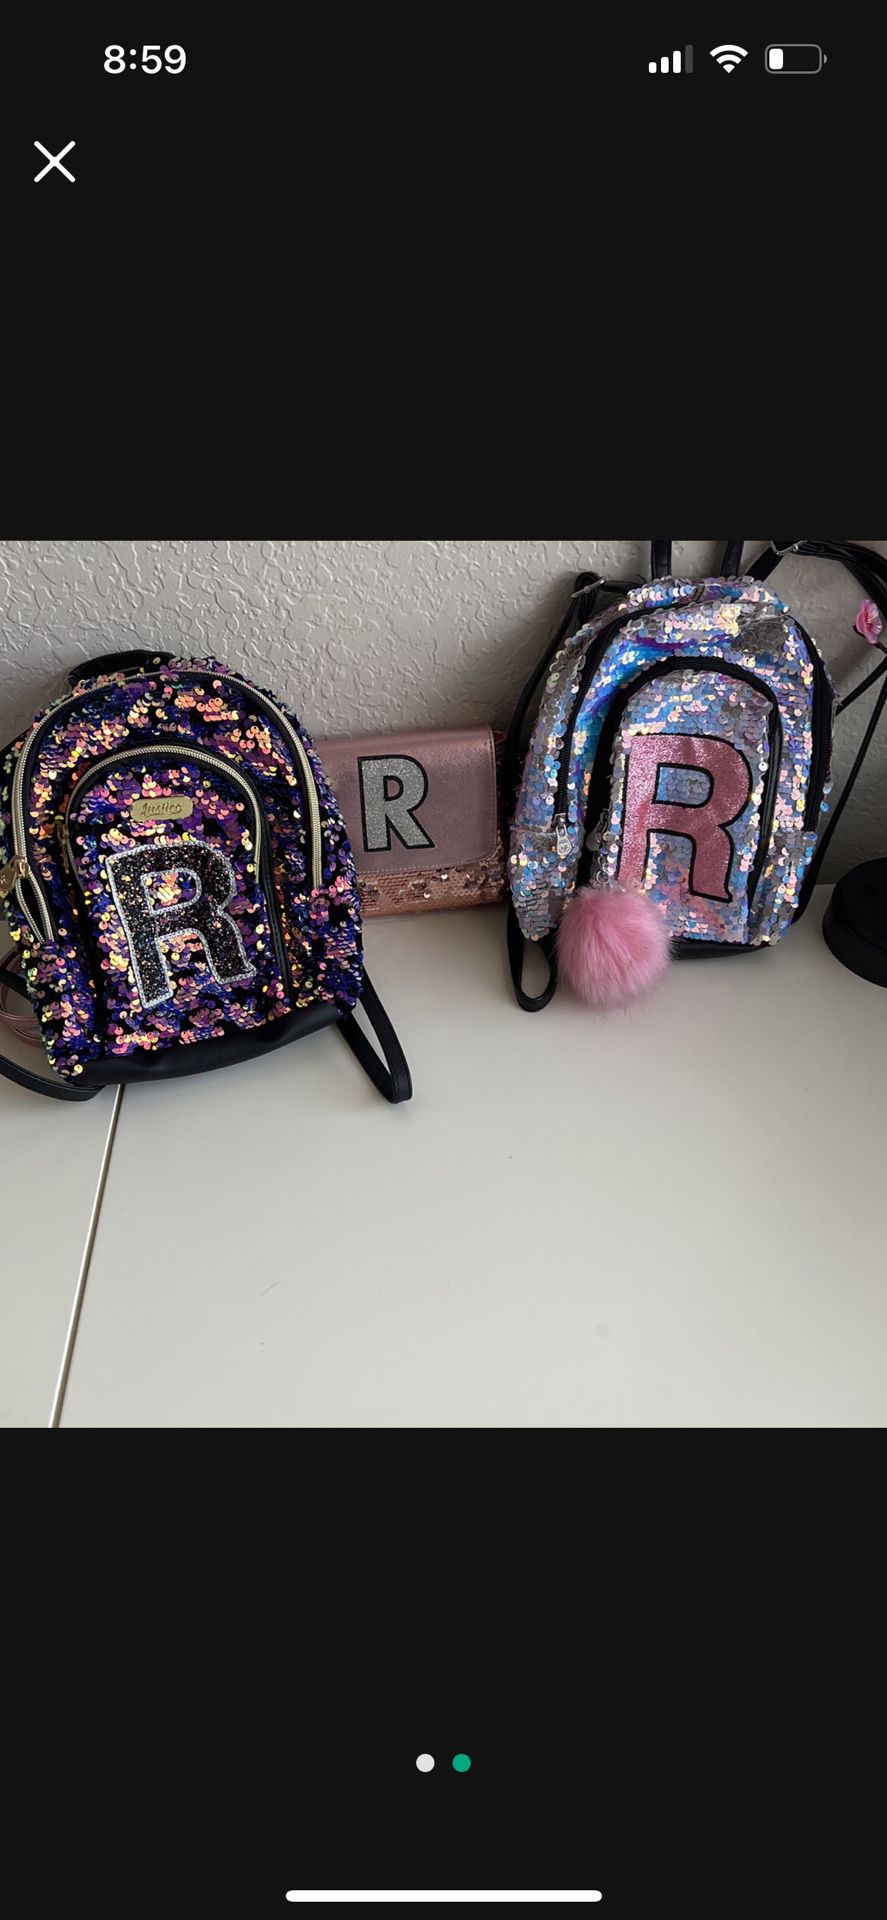 Justice Backpack / Purses 